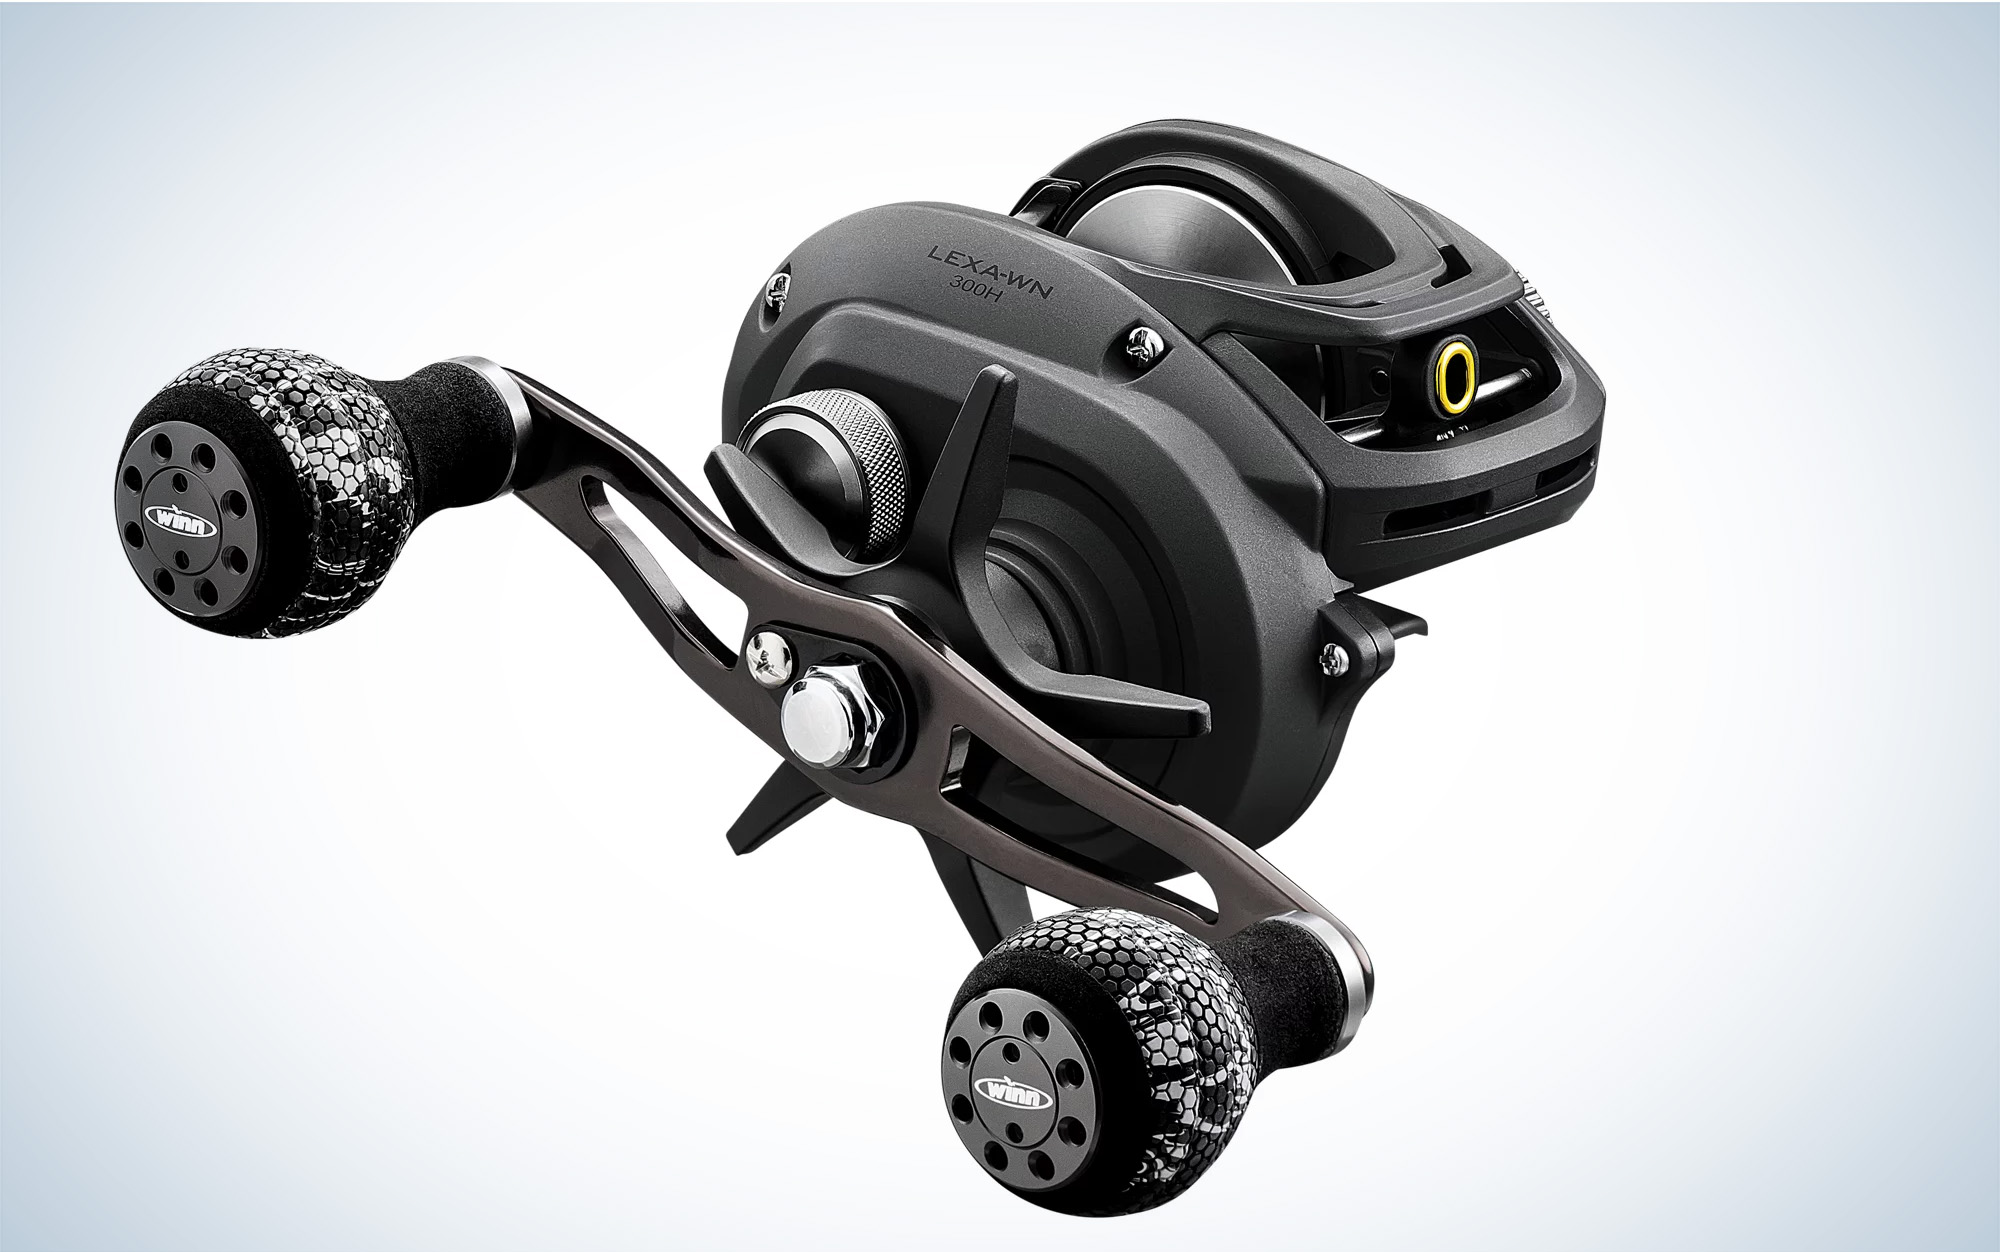 Daiwa Lexa WN is a low profile casting reel with comfortable handles